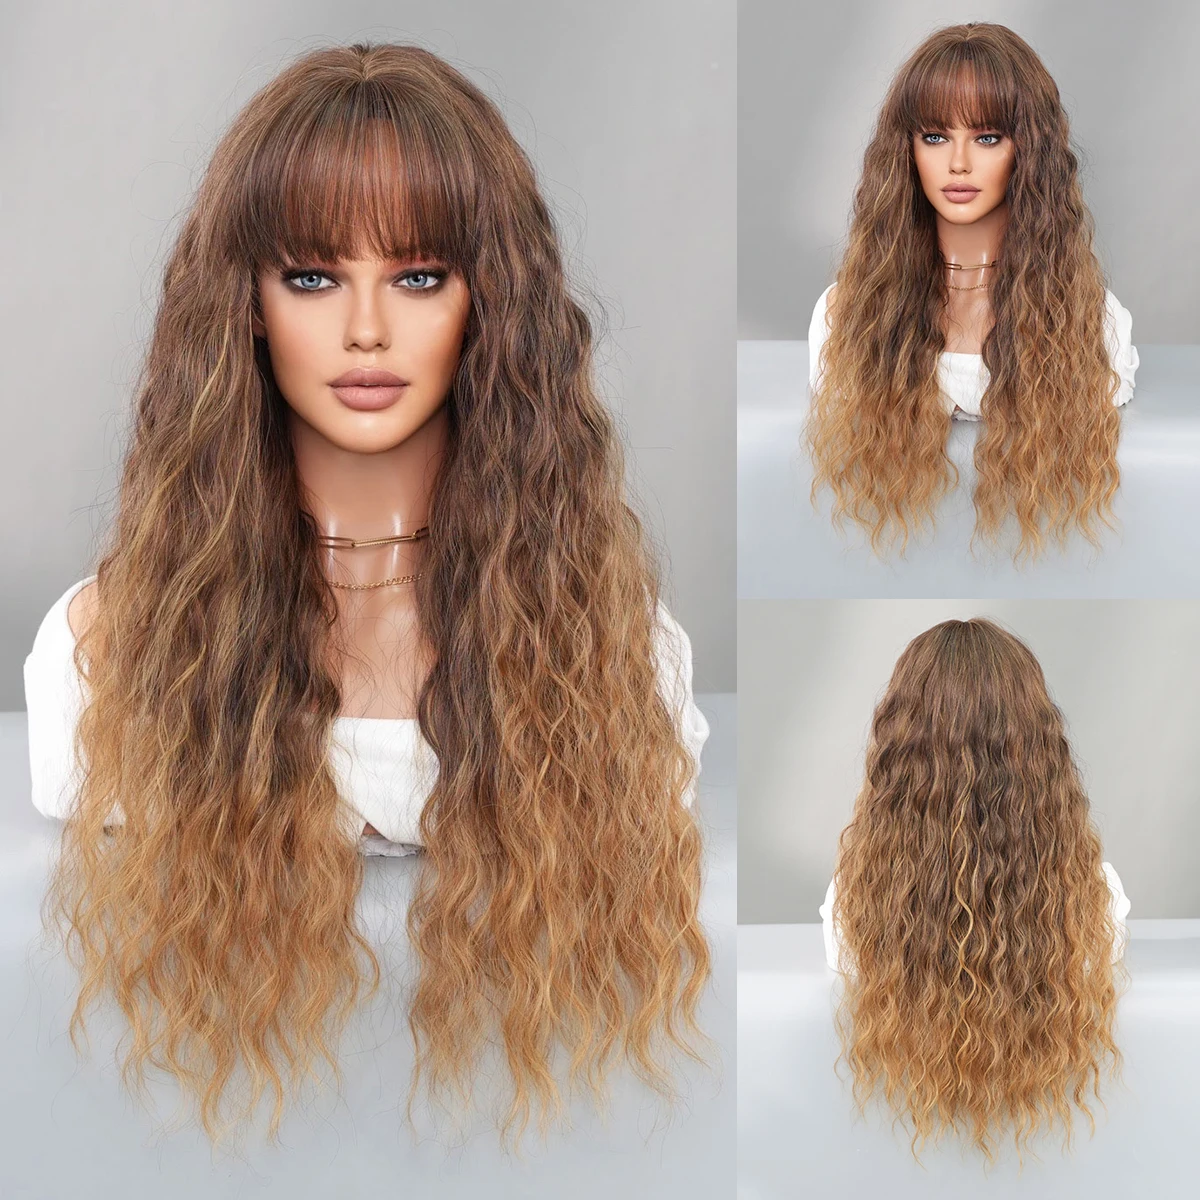 PARK YUN Long Loose Curly Wave Cool Brown Wigs with Bangs High Density Synthetic Gradient blonde Hair Wigs for Women Daily Use